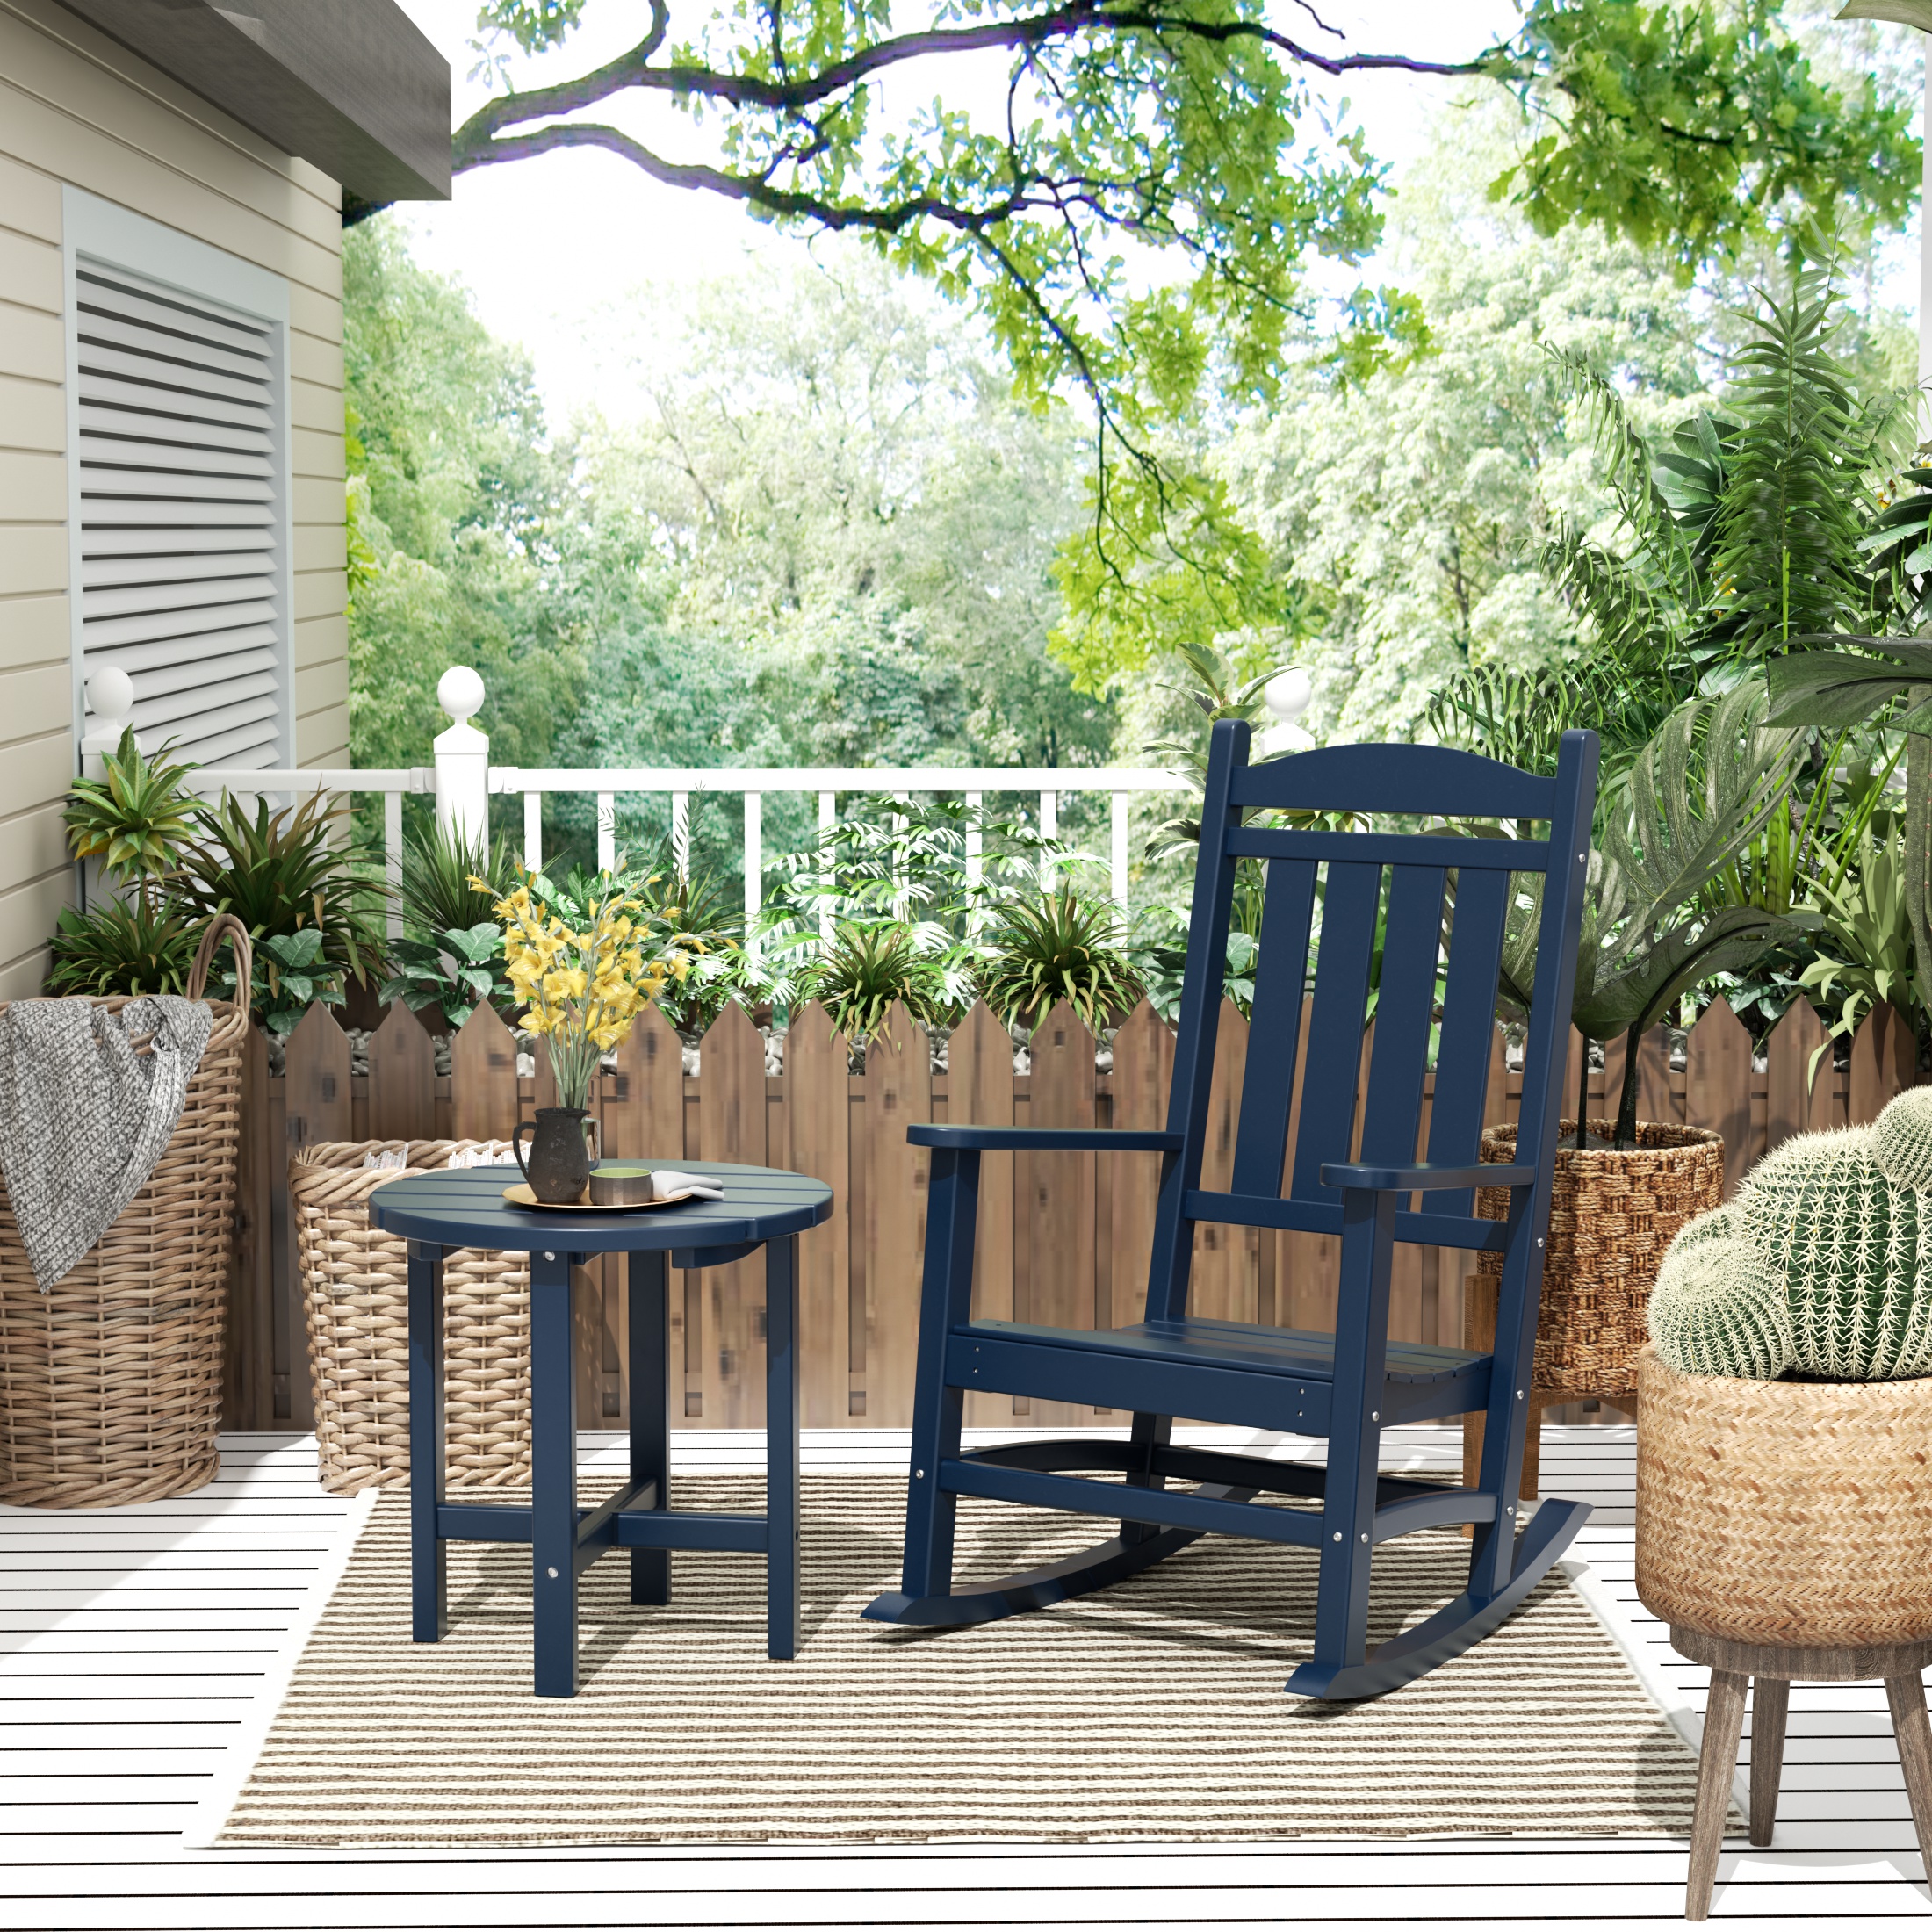 GARDEN 2-Piece Set Classic Plastic Porch Rocking Chair with Round Side Table Included, Navy Blue - image 1 of 7